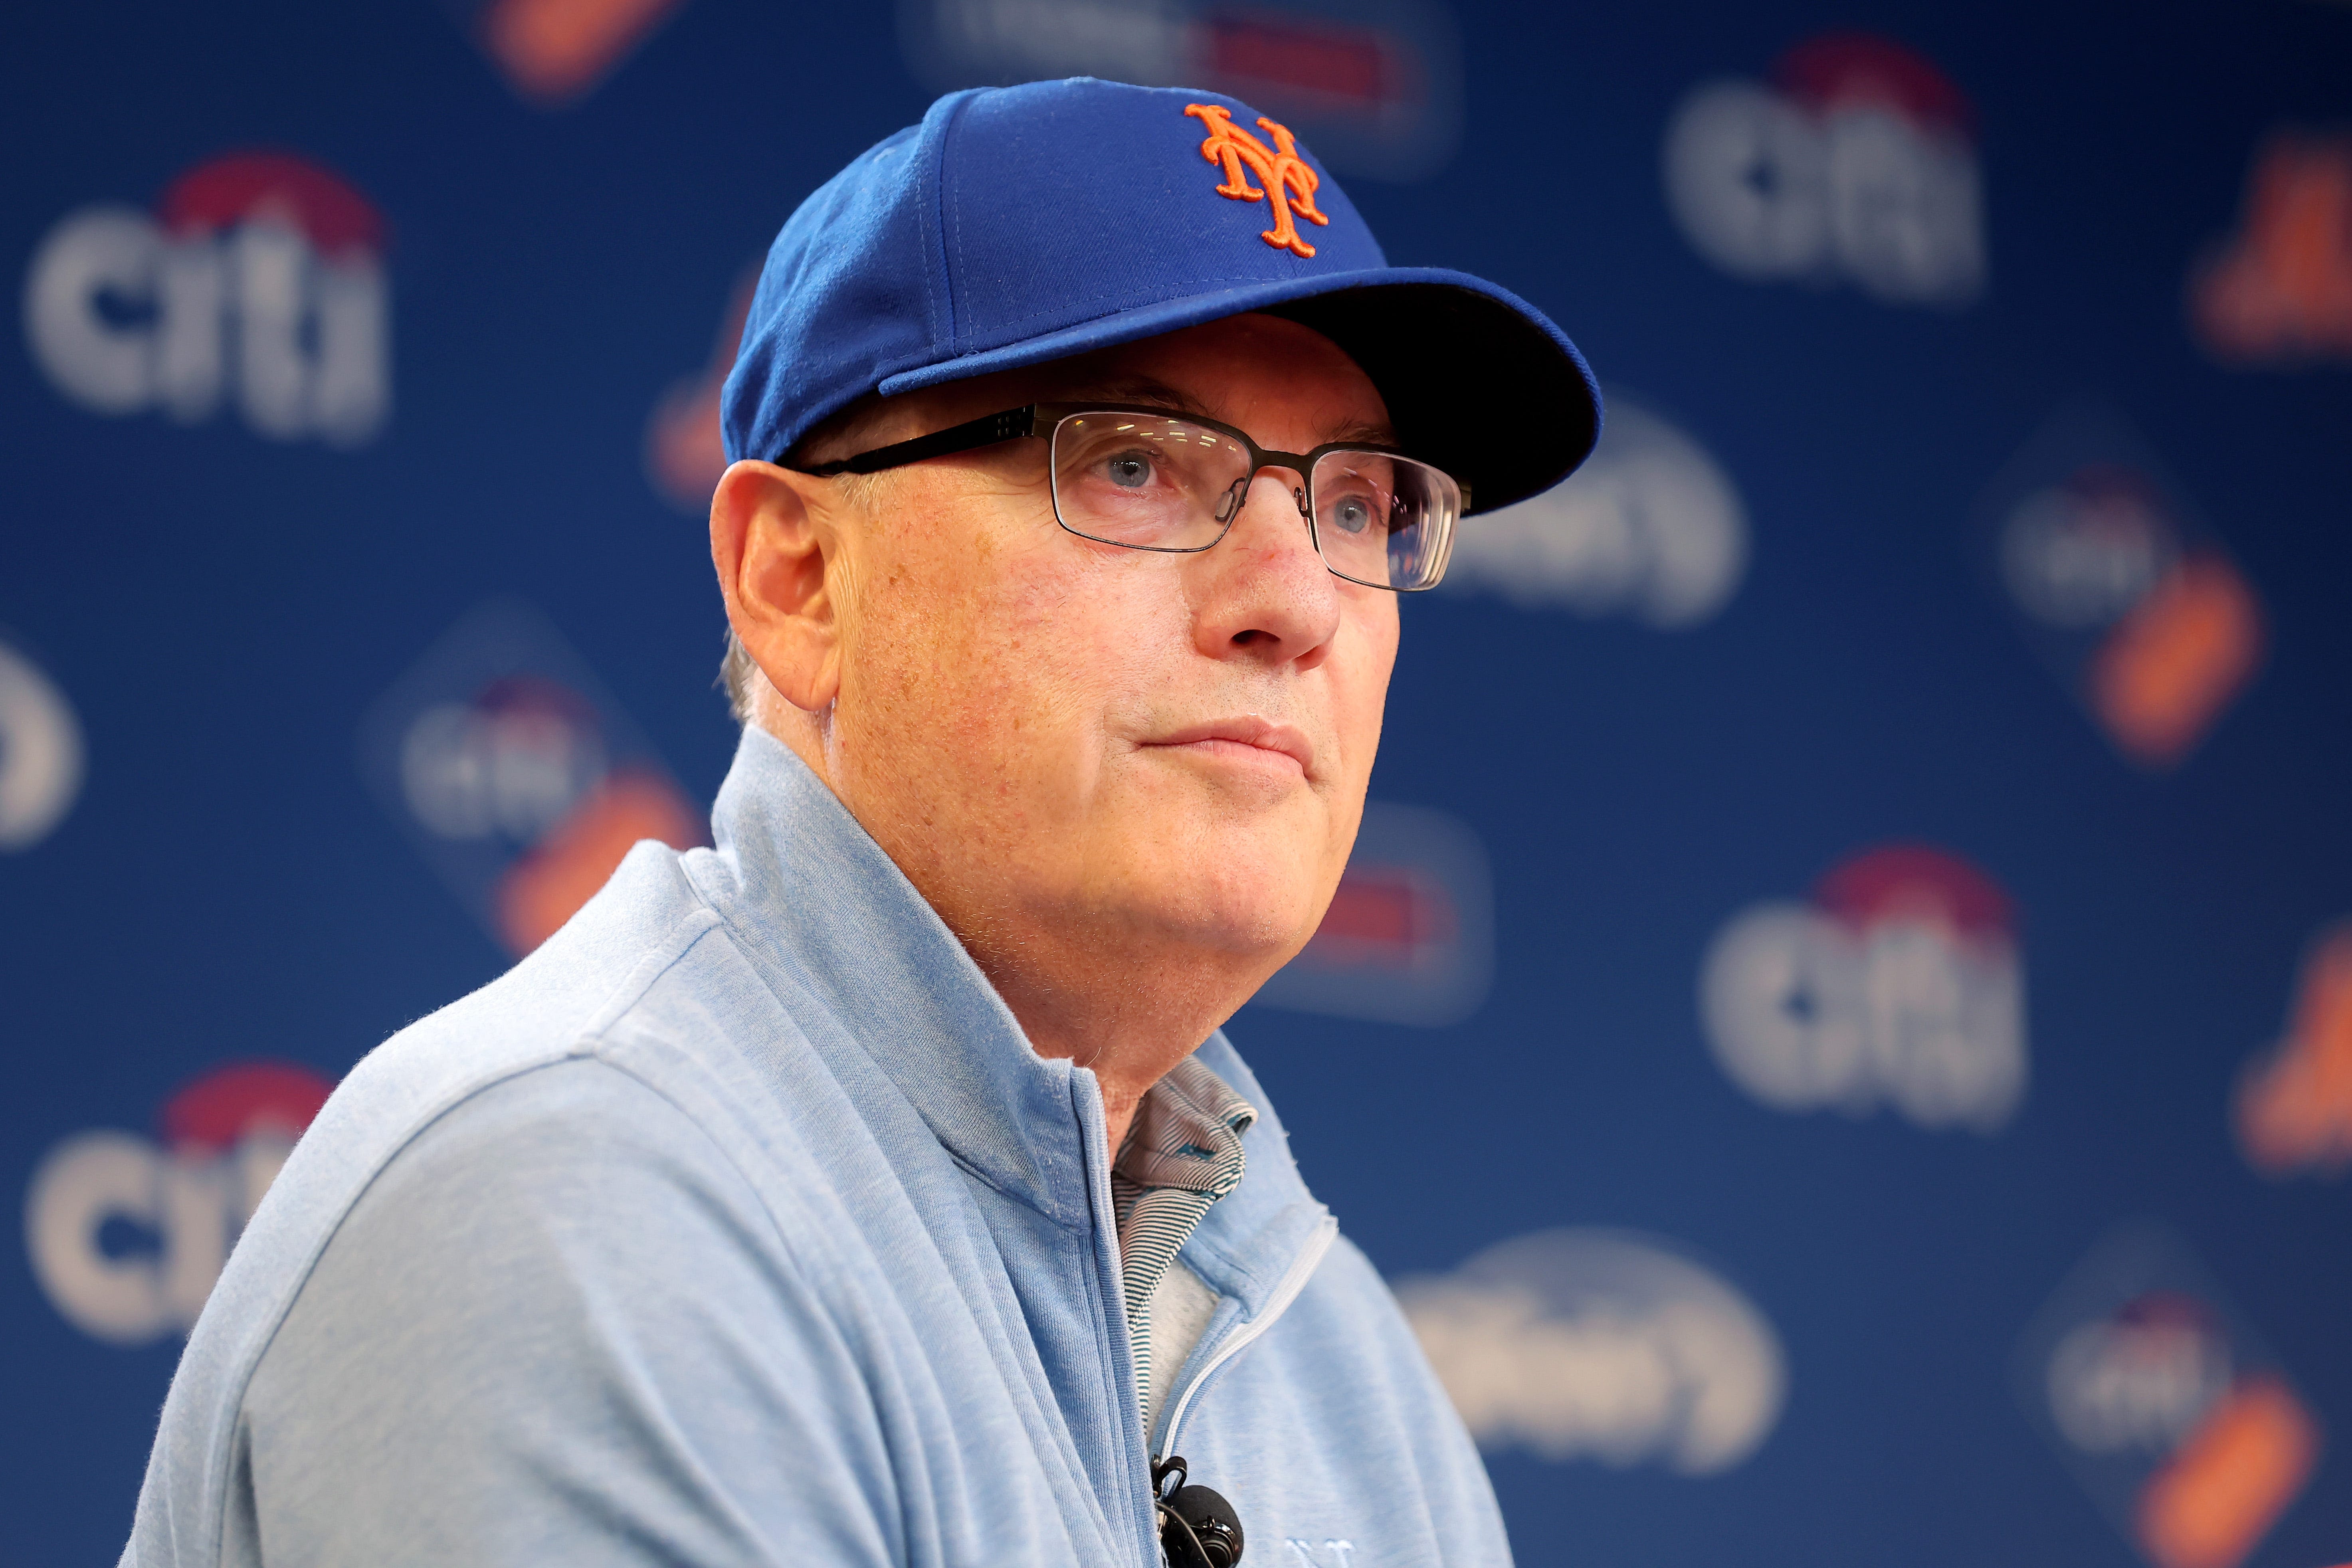 Mets owner Steve Cohen tweets after Subway Series sweep over Yankees. Here's what he said